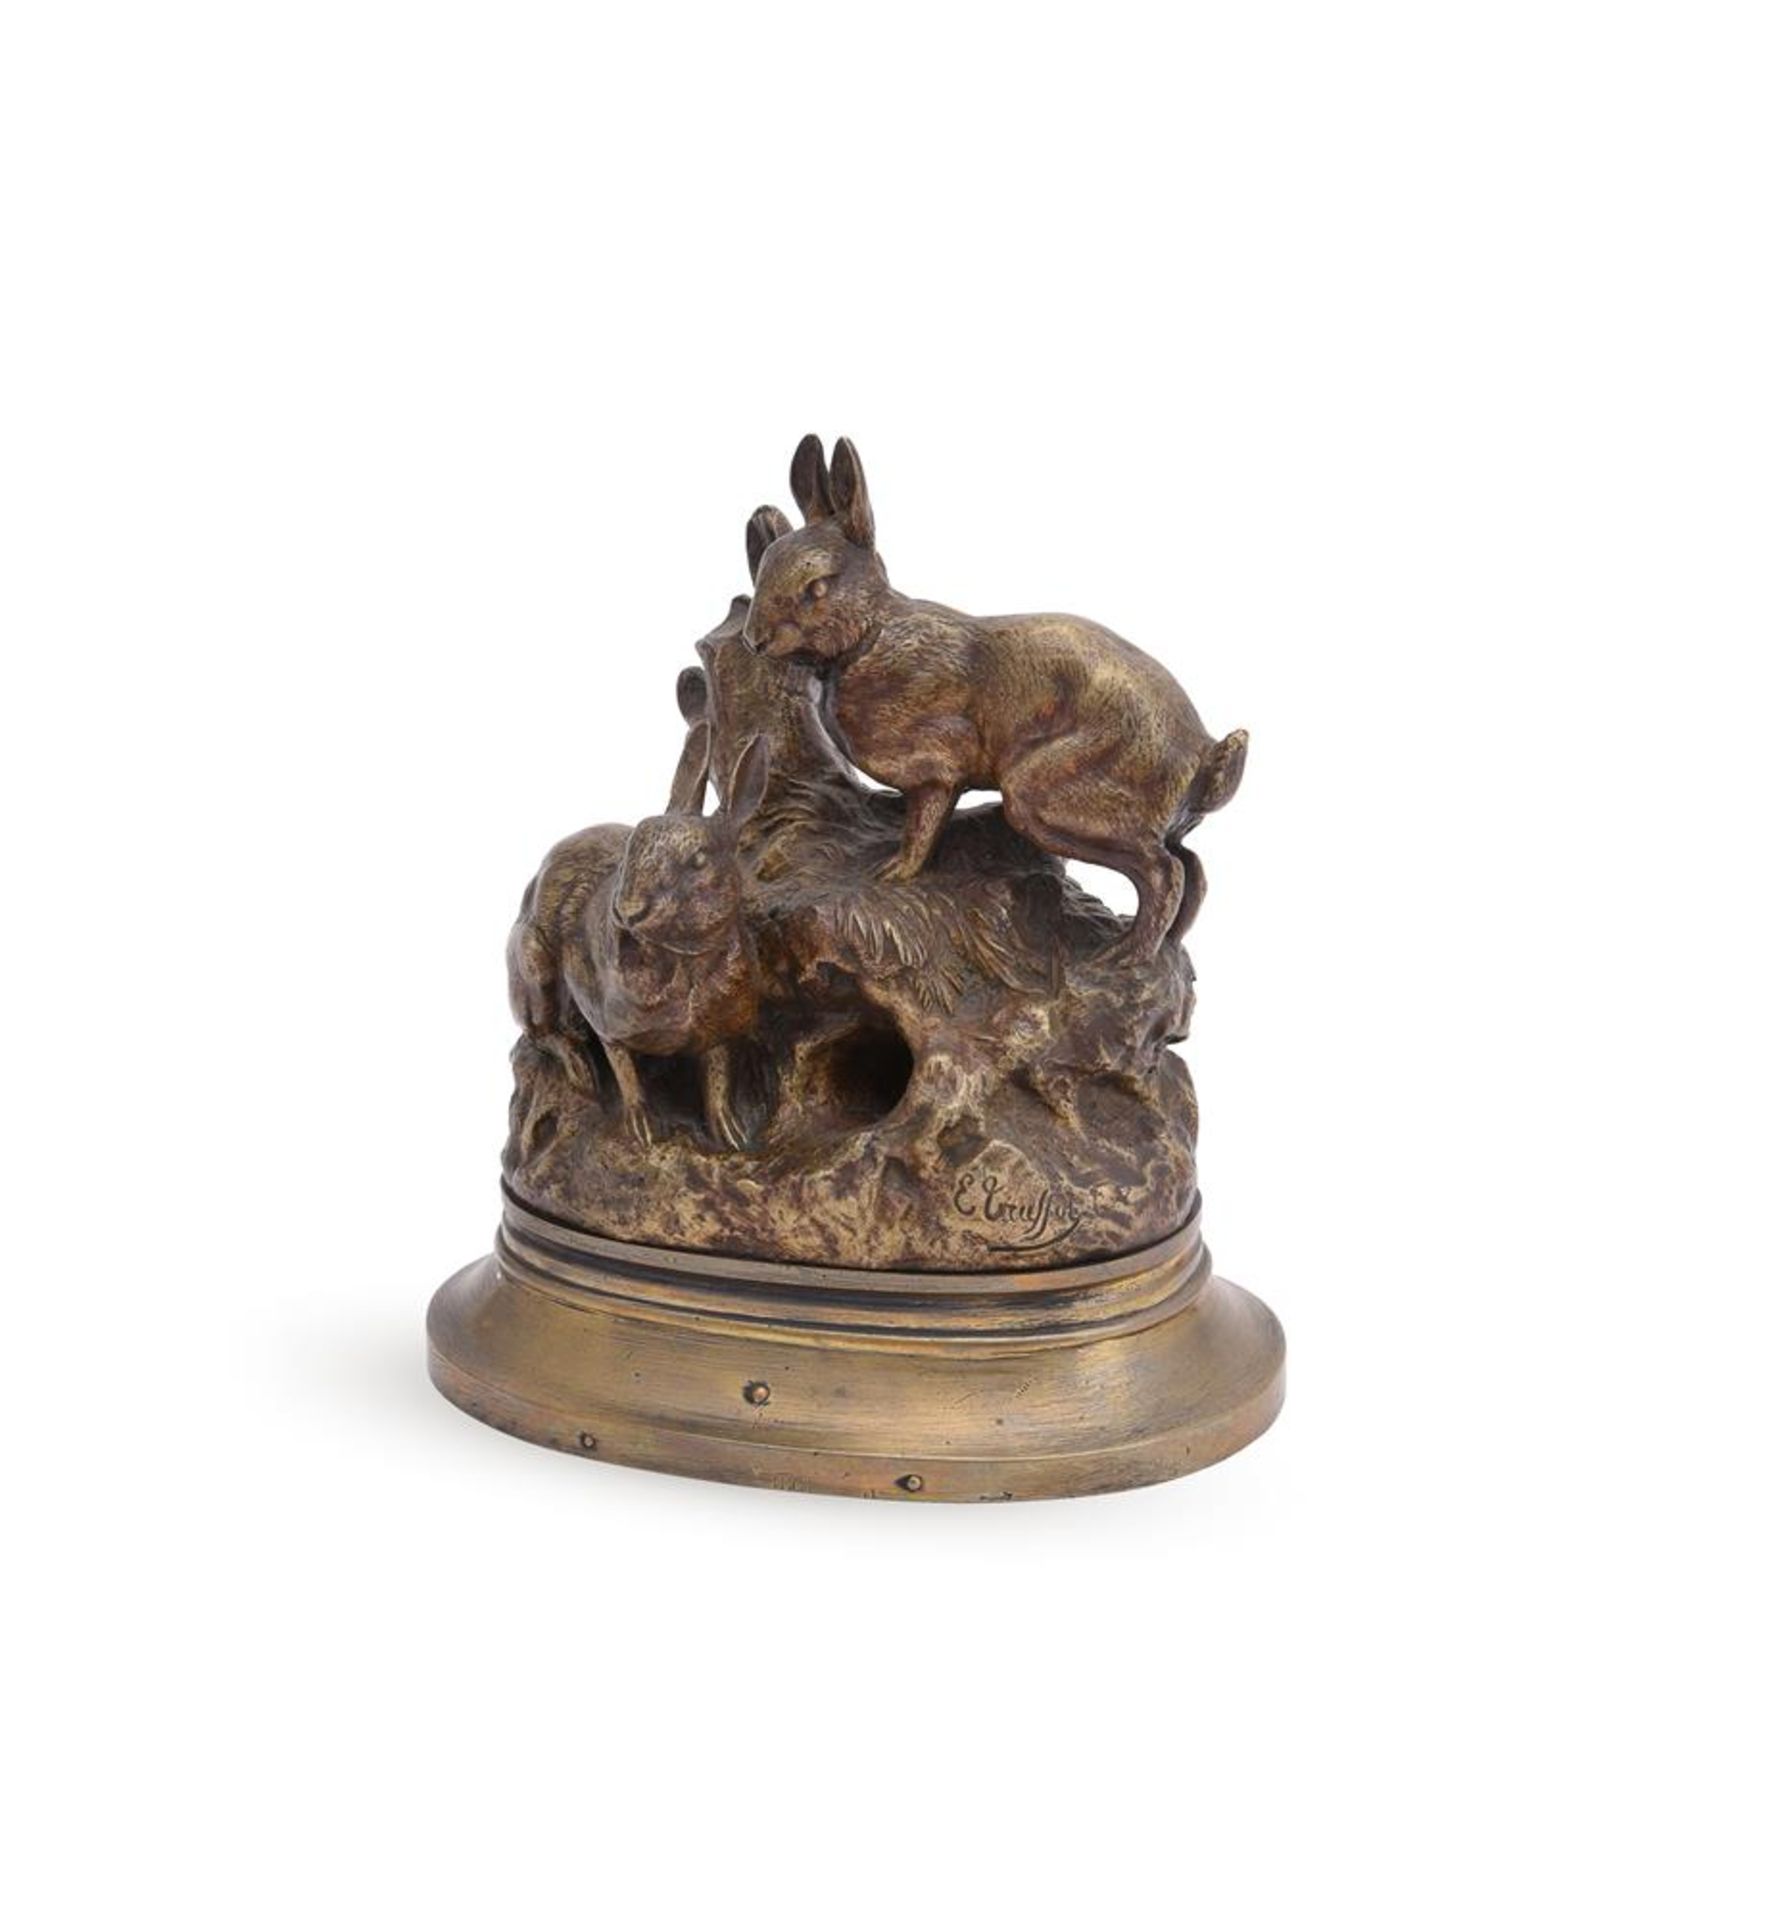 EMILE LOUIS TRUFFOT (FRENCH, 1843-1896), A BRONZE MODEL OF A PAIR OF RABBITS BY THEIR BURROW - Image 2 of 4